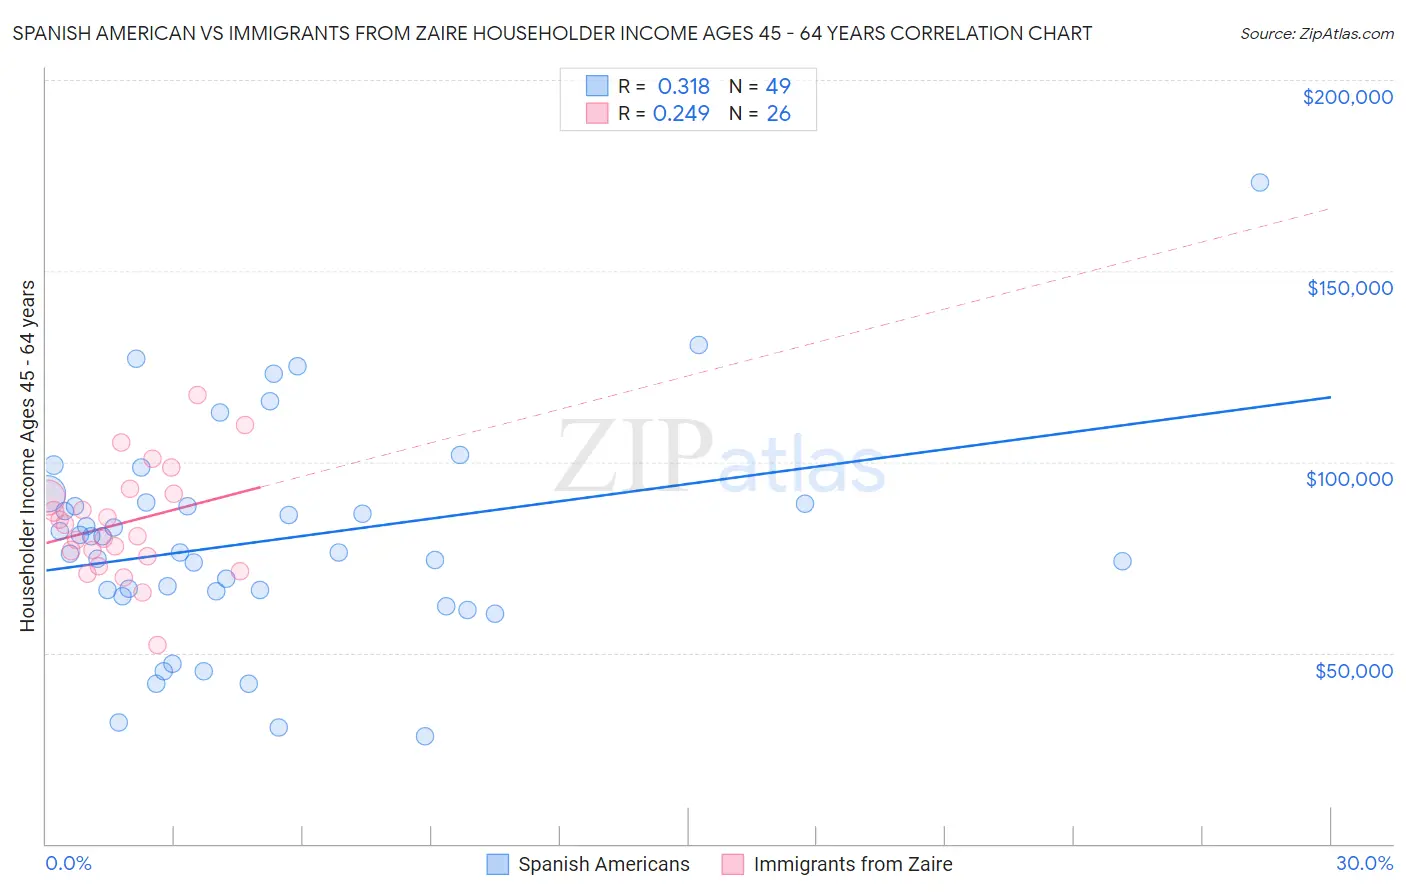 Spanish American vs Immigrants from Zaire Householder Income Ages 45 - 64 years